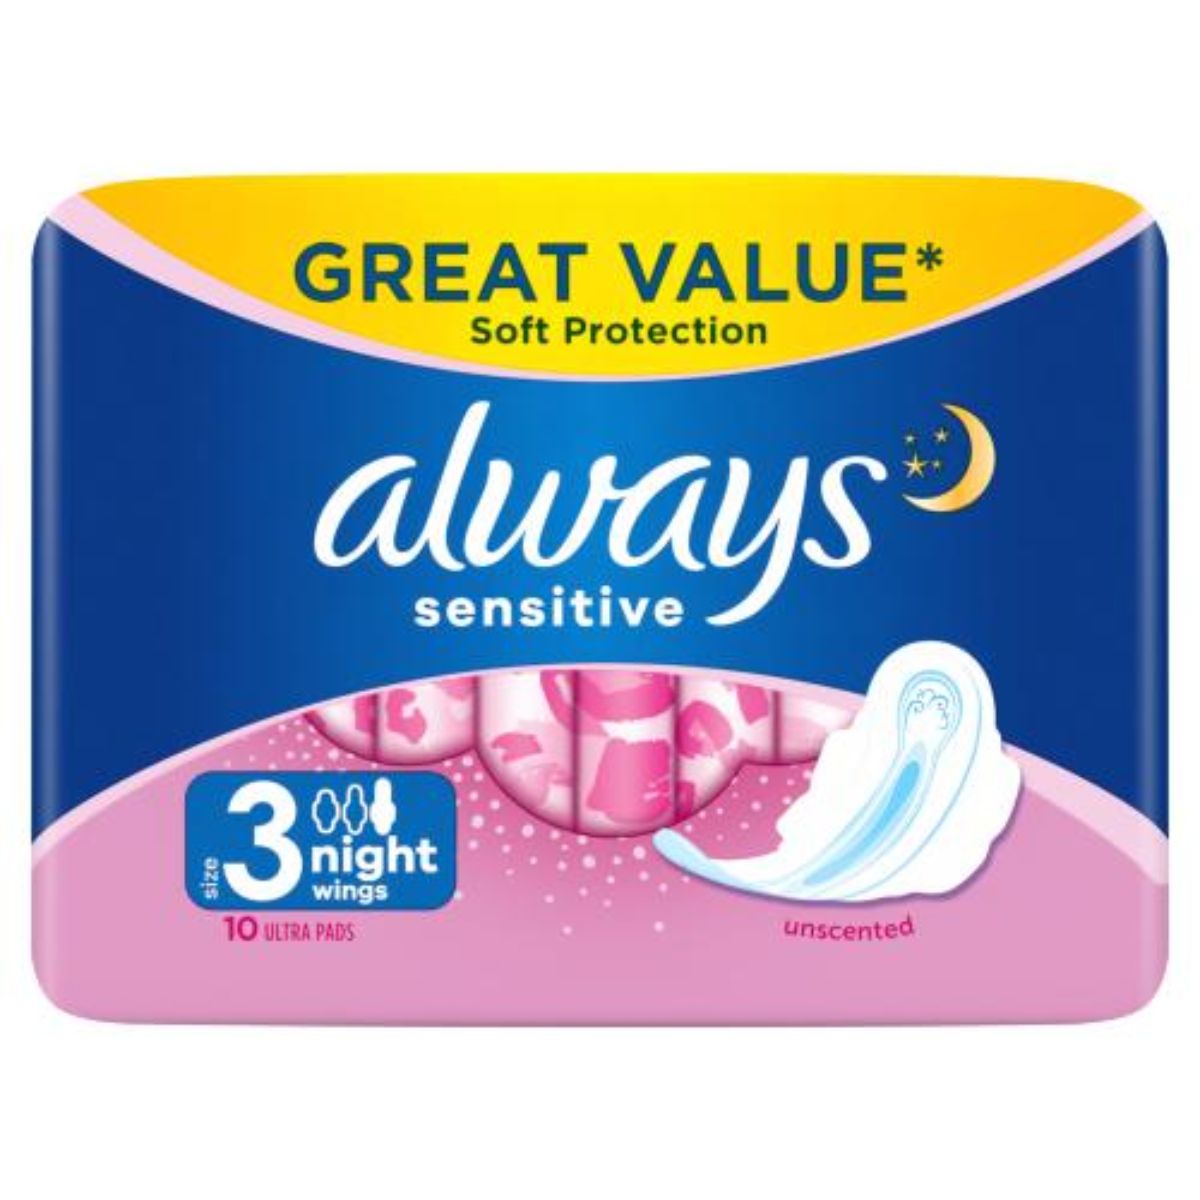 Great value Always - Sensitive Night Ultra (Size 3) Sanitary Towels Wings - 10 Pads.